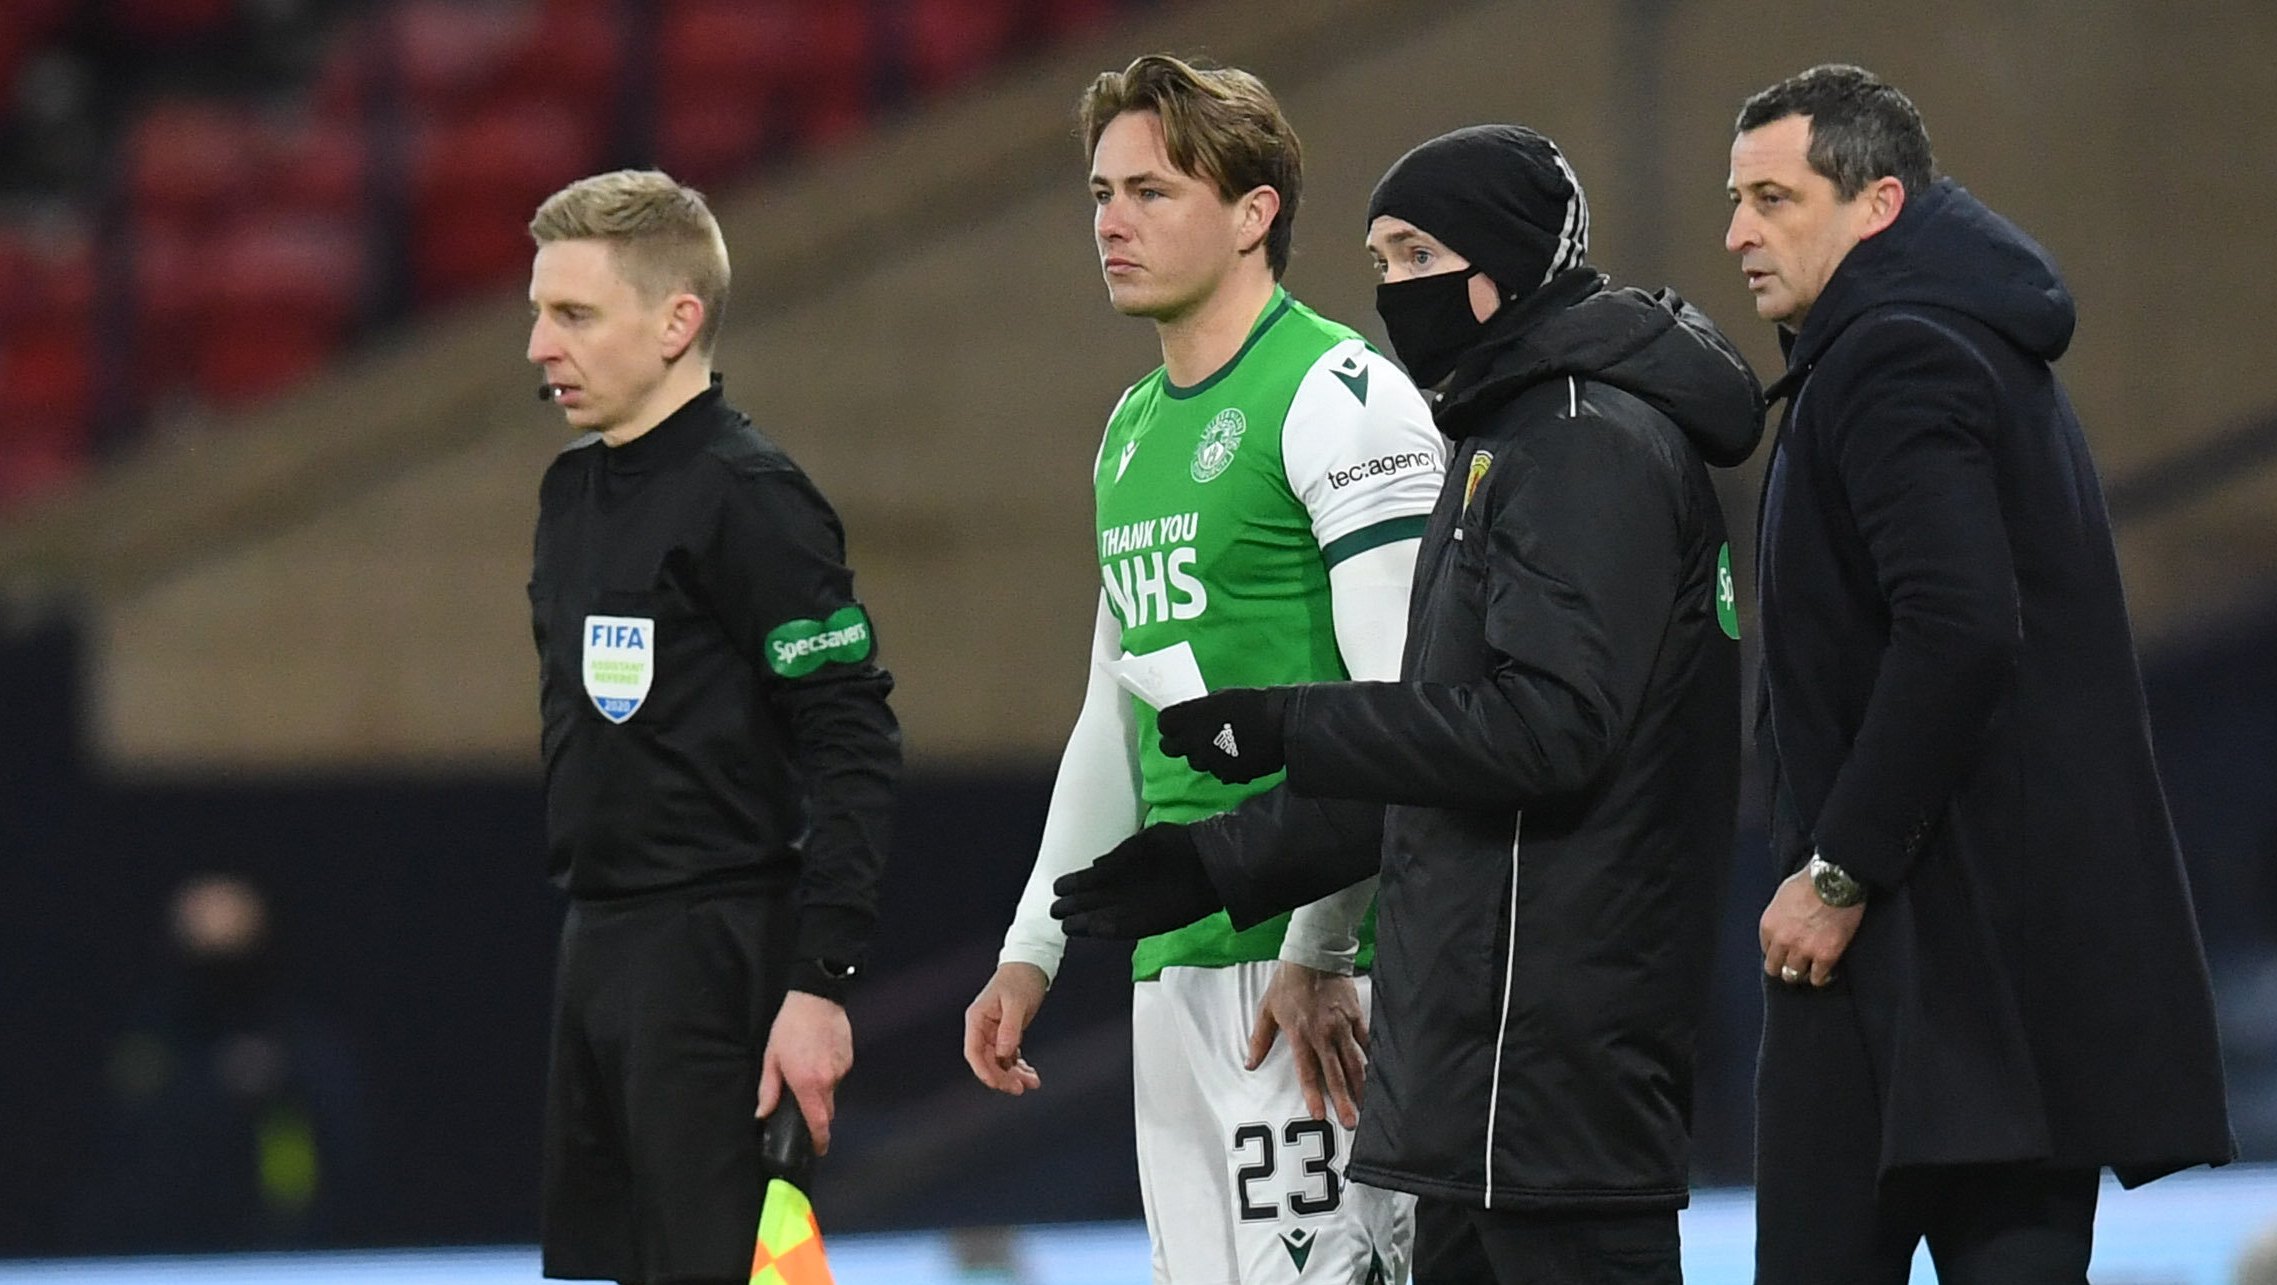 Scott Allan makes his first appearance following his diagnosis.